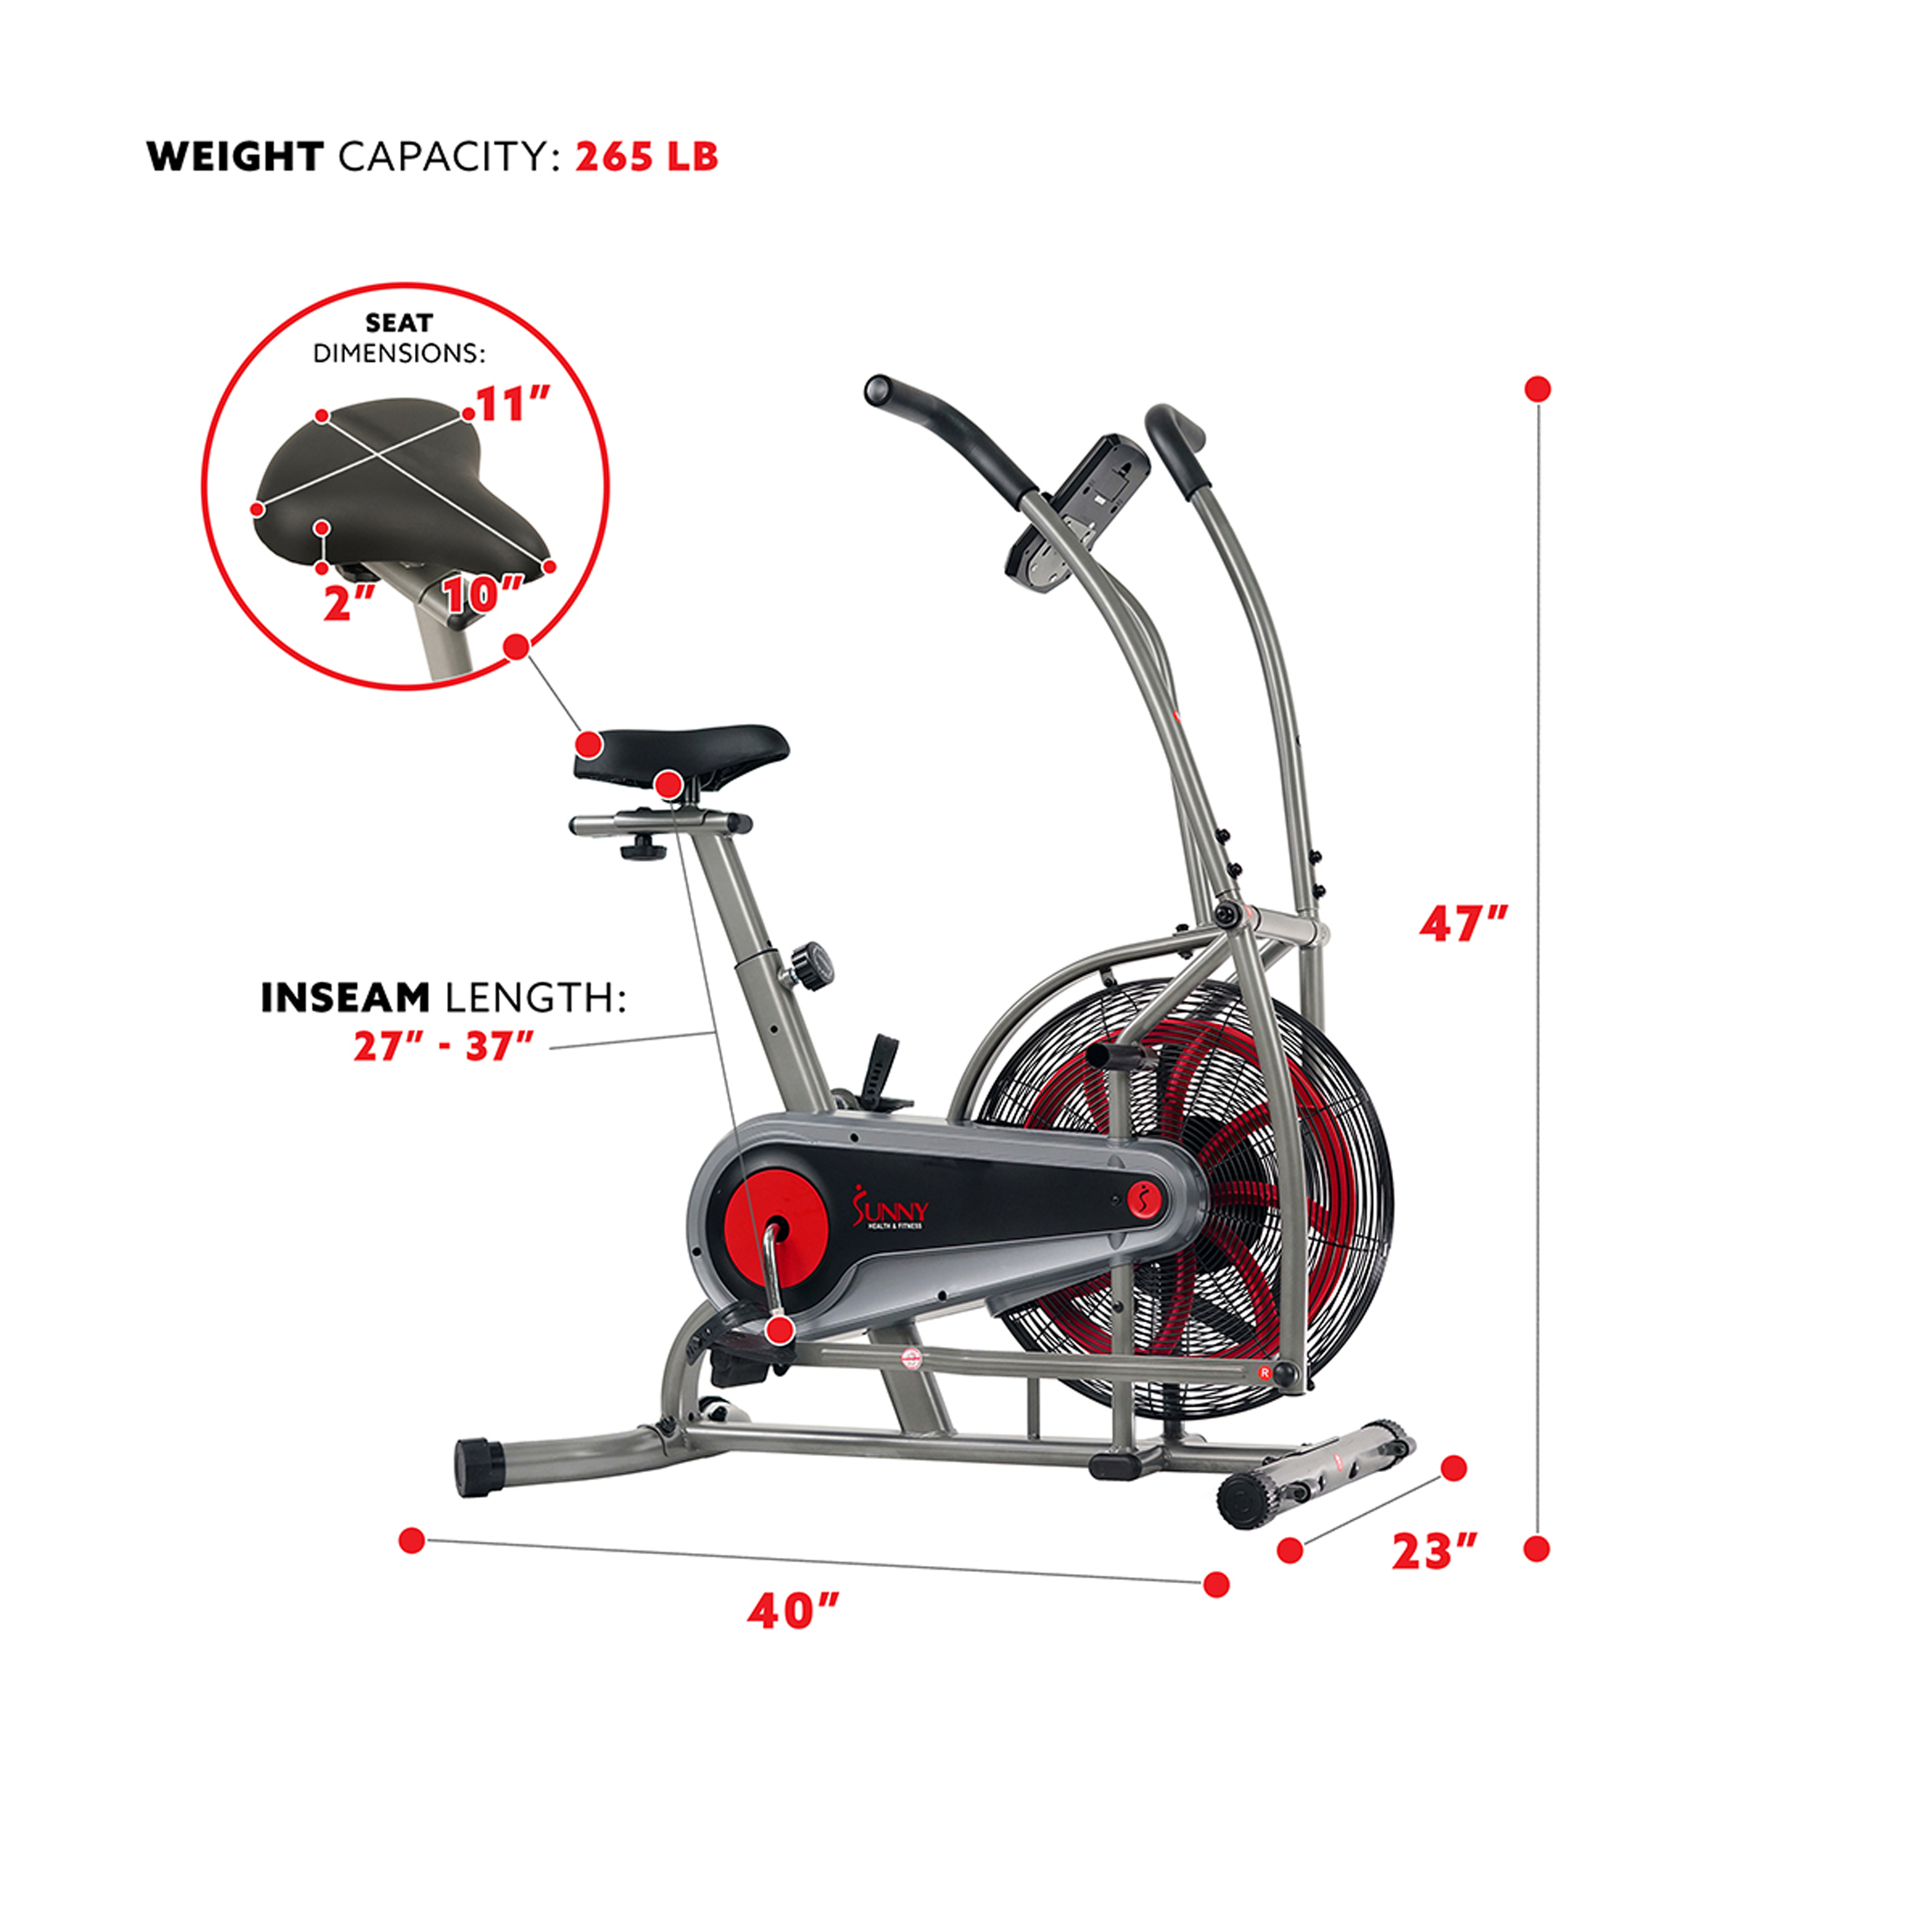 Sunny Health & Fitness Stationary Motion Fan Air Bike Exercise Machine, Indoor Home Cycling Trainer Static Bicycle, SF-B2916 - image 5 of 8